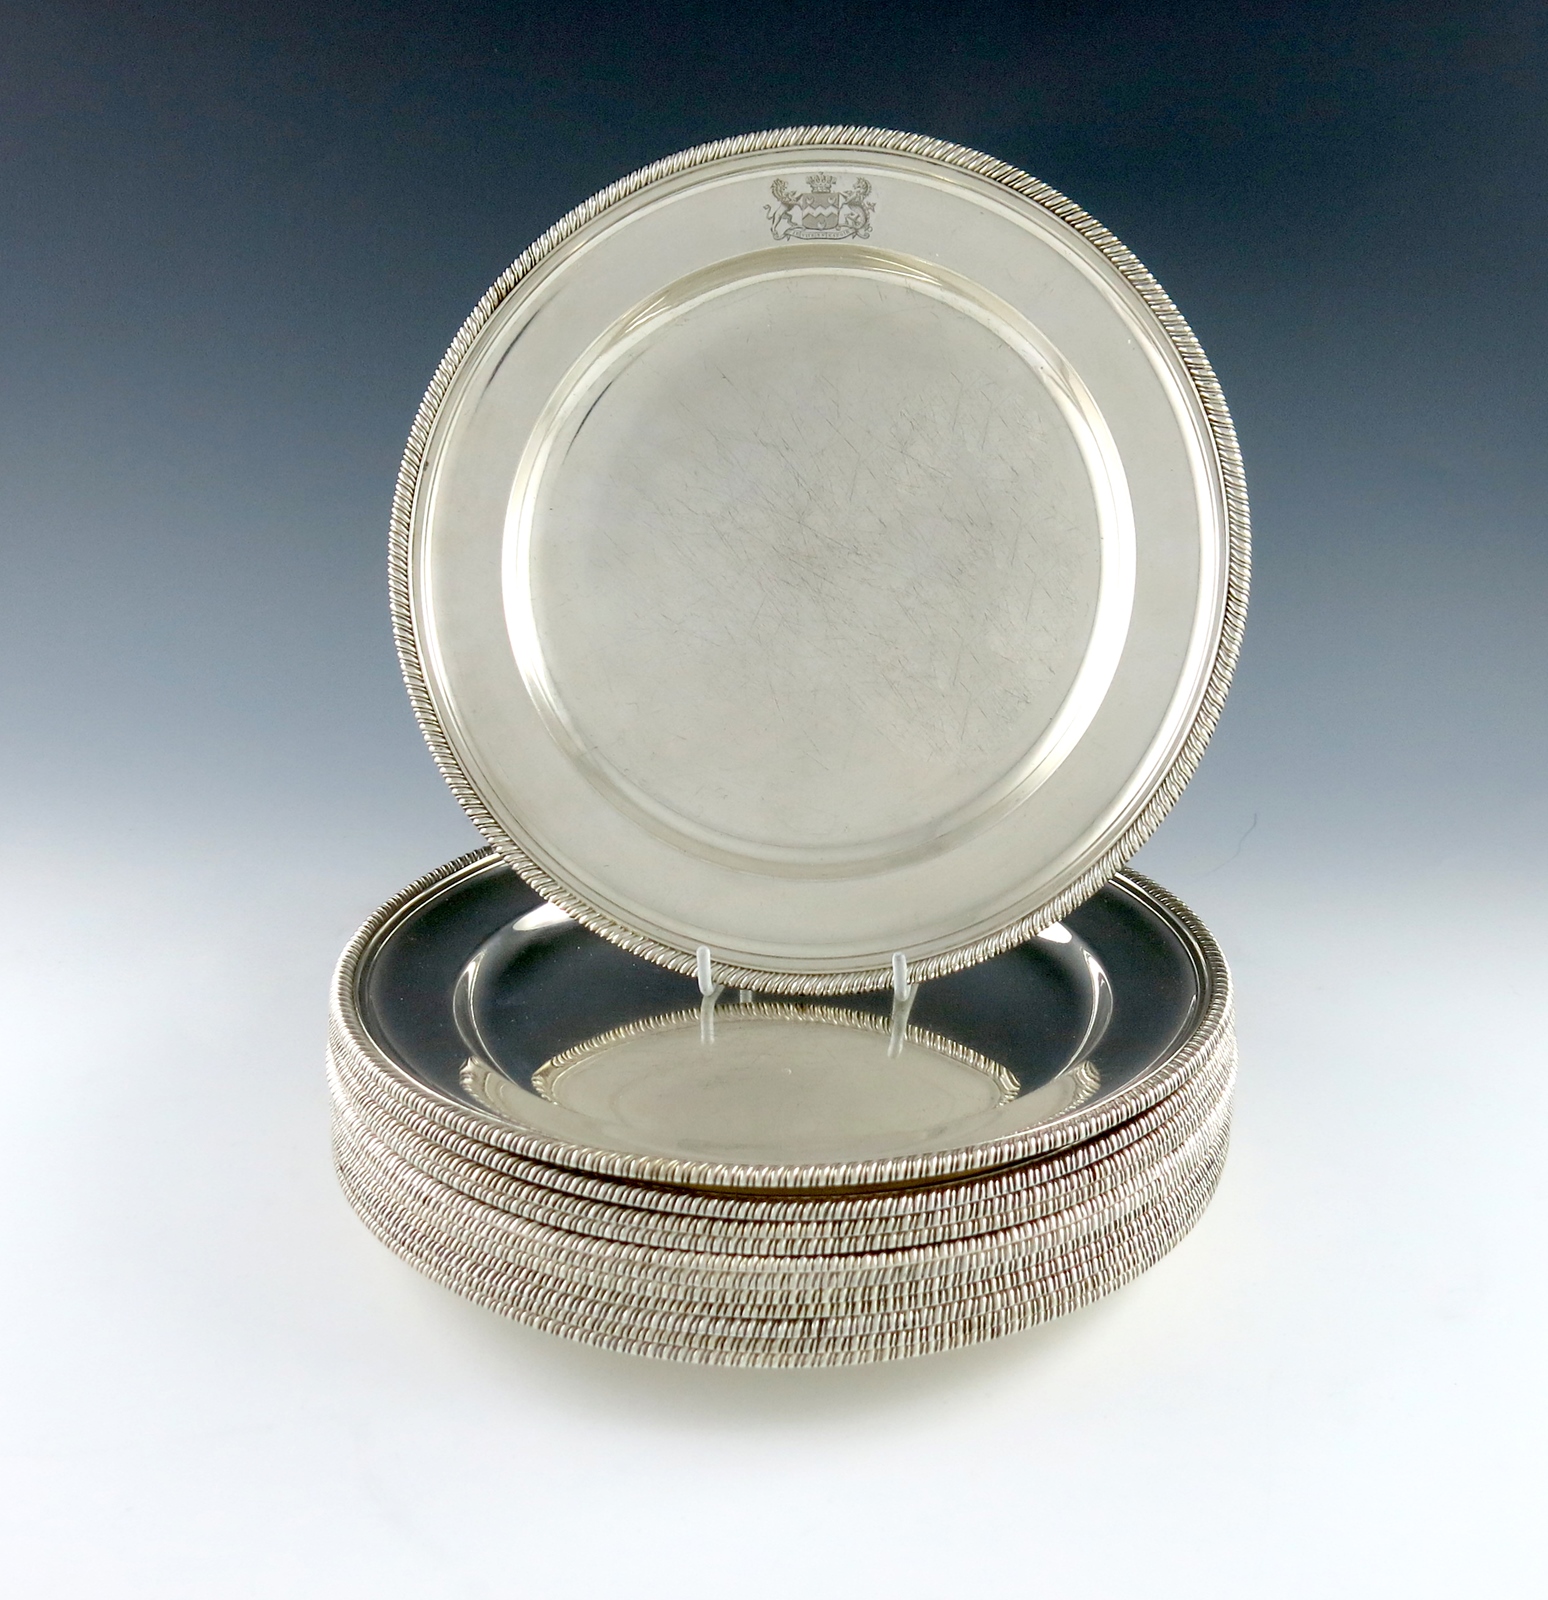 A set of twelve Victorian electroplated plates, by Elkington and Co, 1876, circular form, gadroon